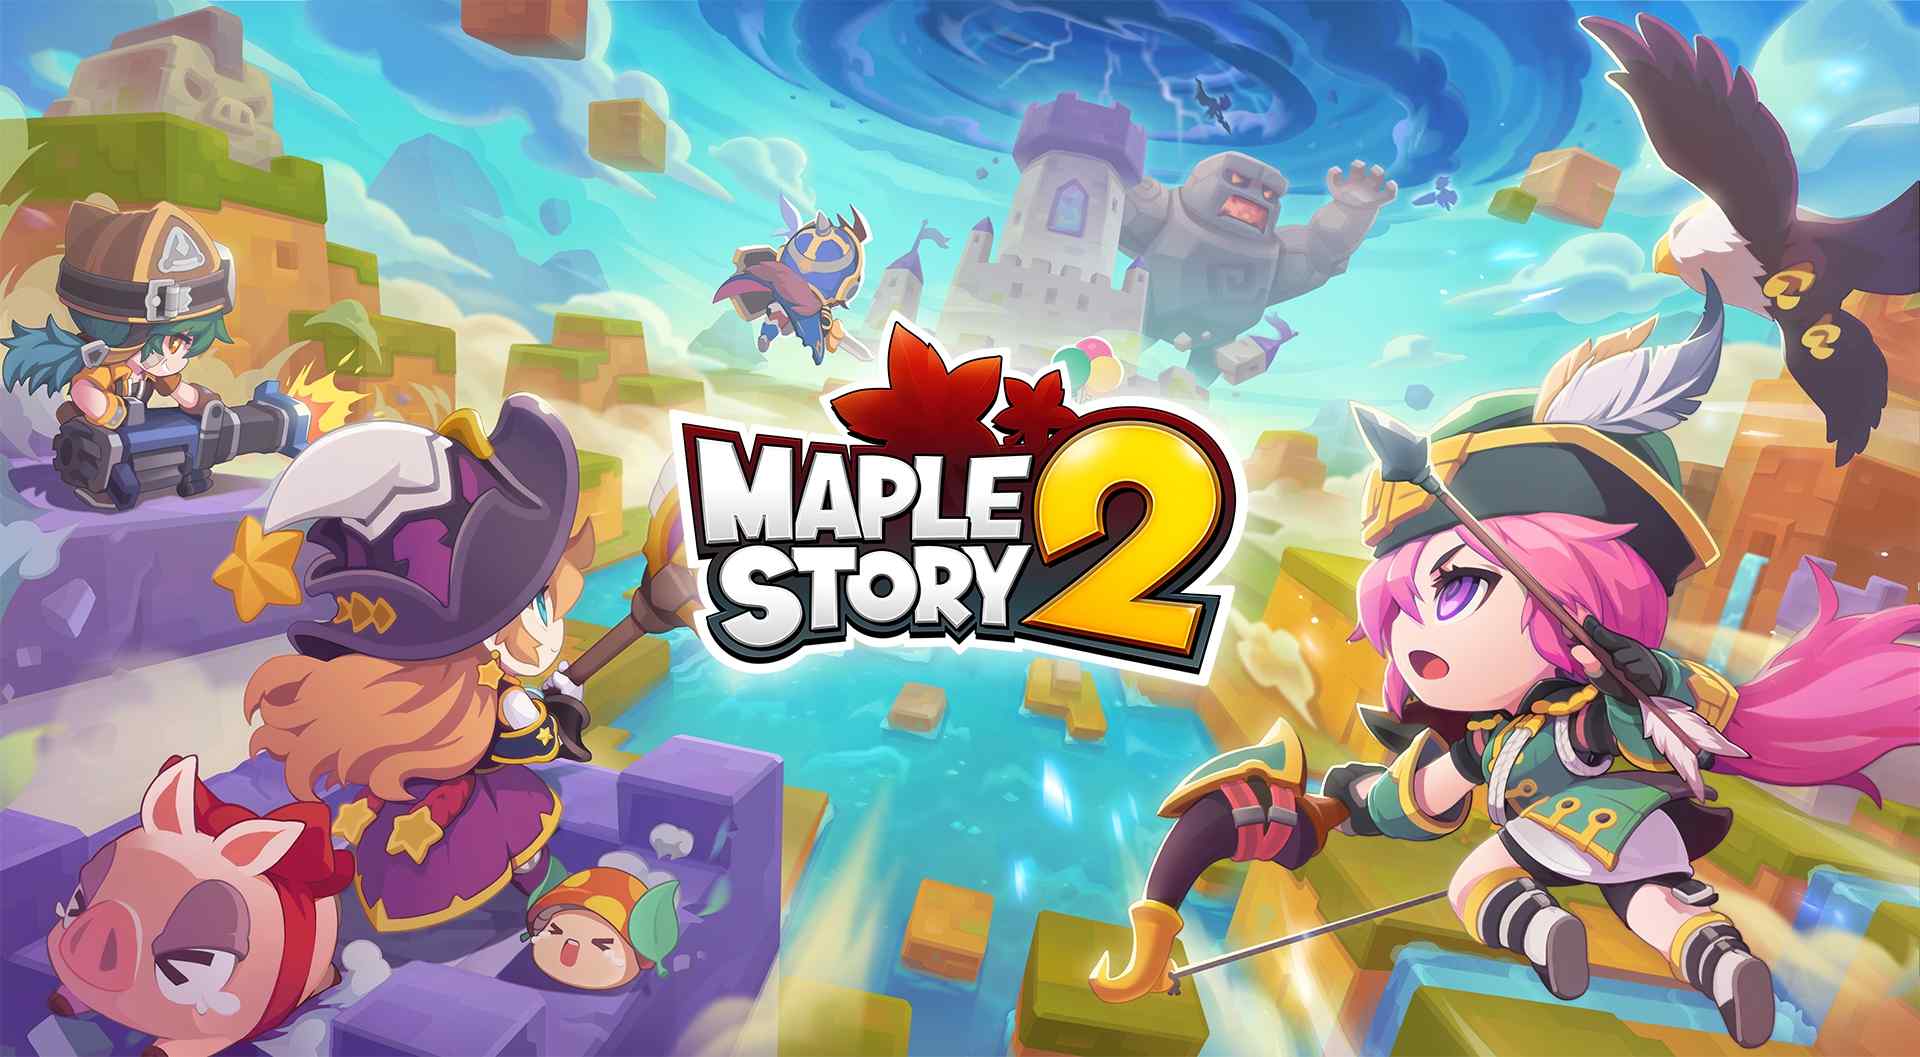 MapleStory 2 Launching on October 10th